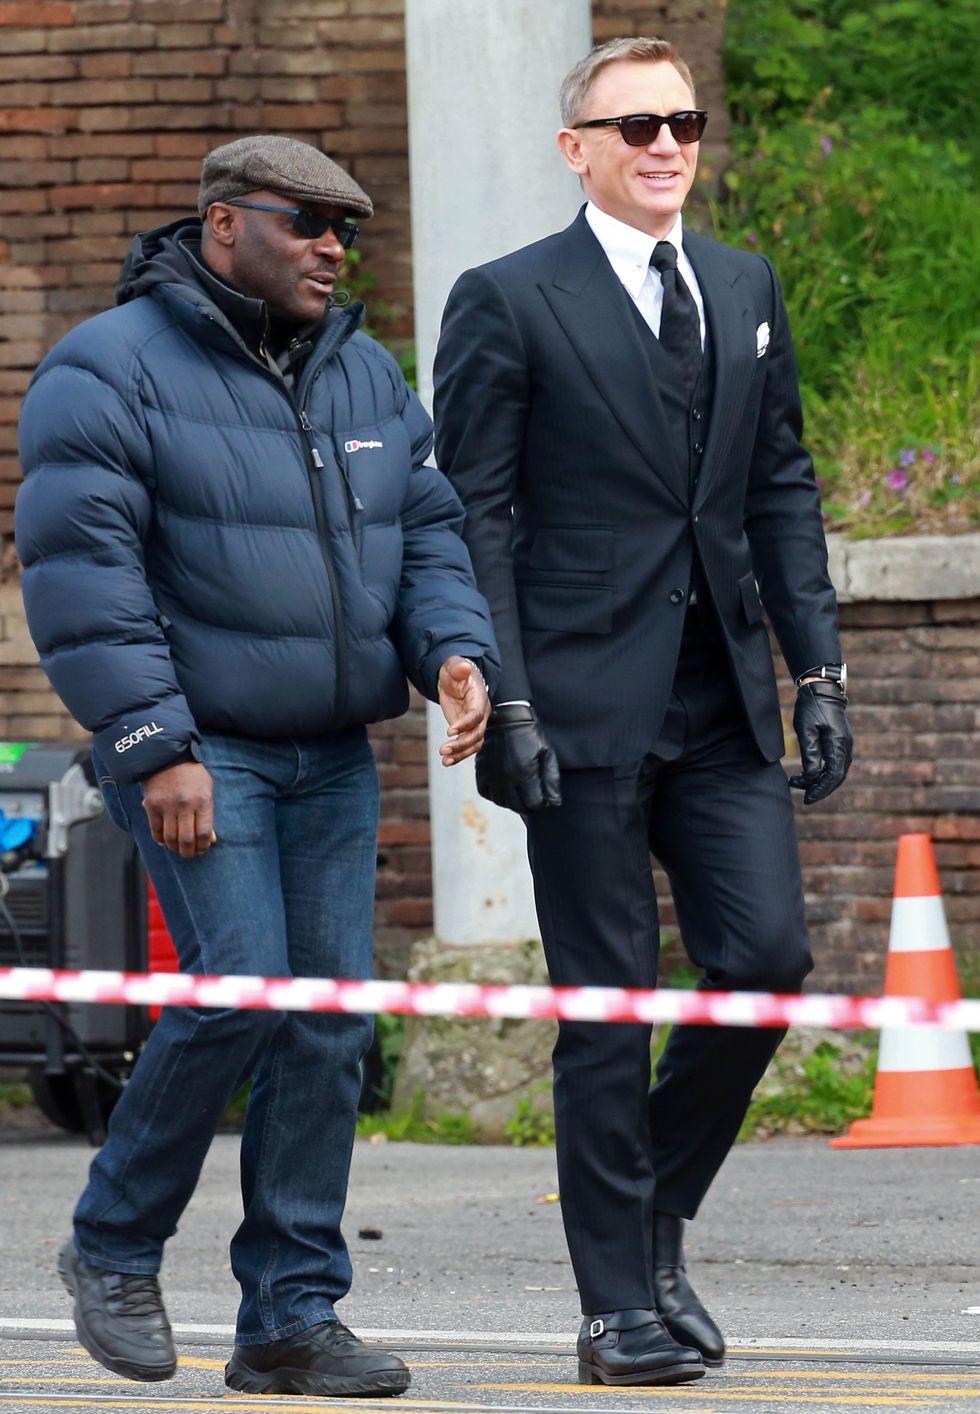 rome, italy february 21 daniel craig r is seen filming scenes for the new james bond film spectre on february 21, 2015 in rome, italy photo by robino salvatoregc images